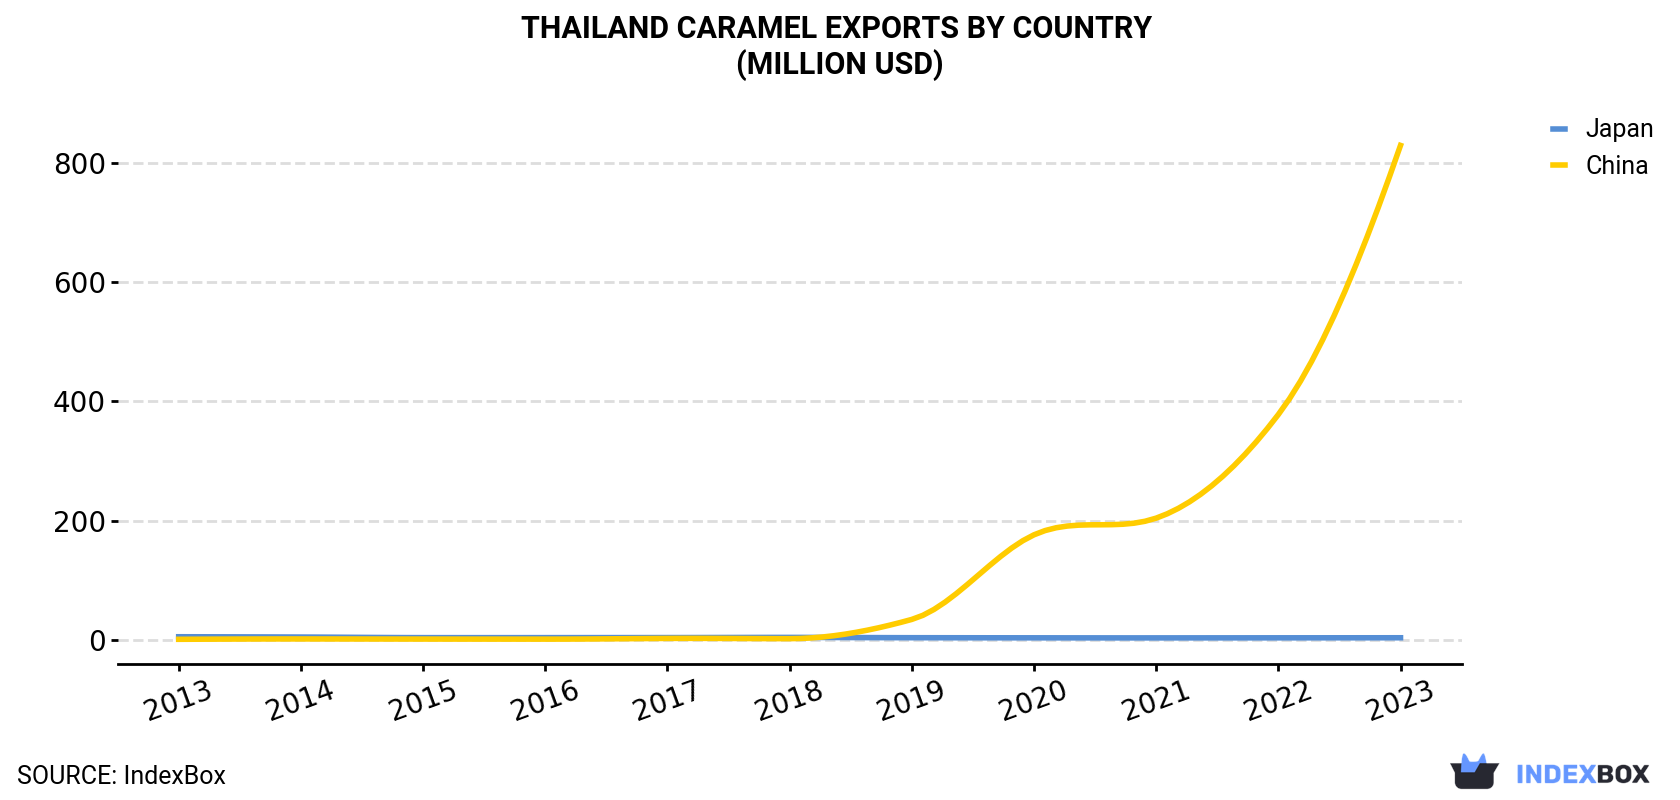 Thailand Caramel Exports By Country (Million USD)